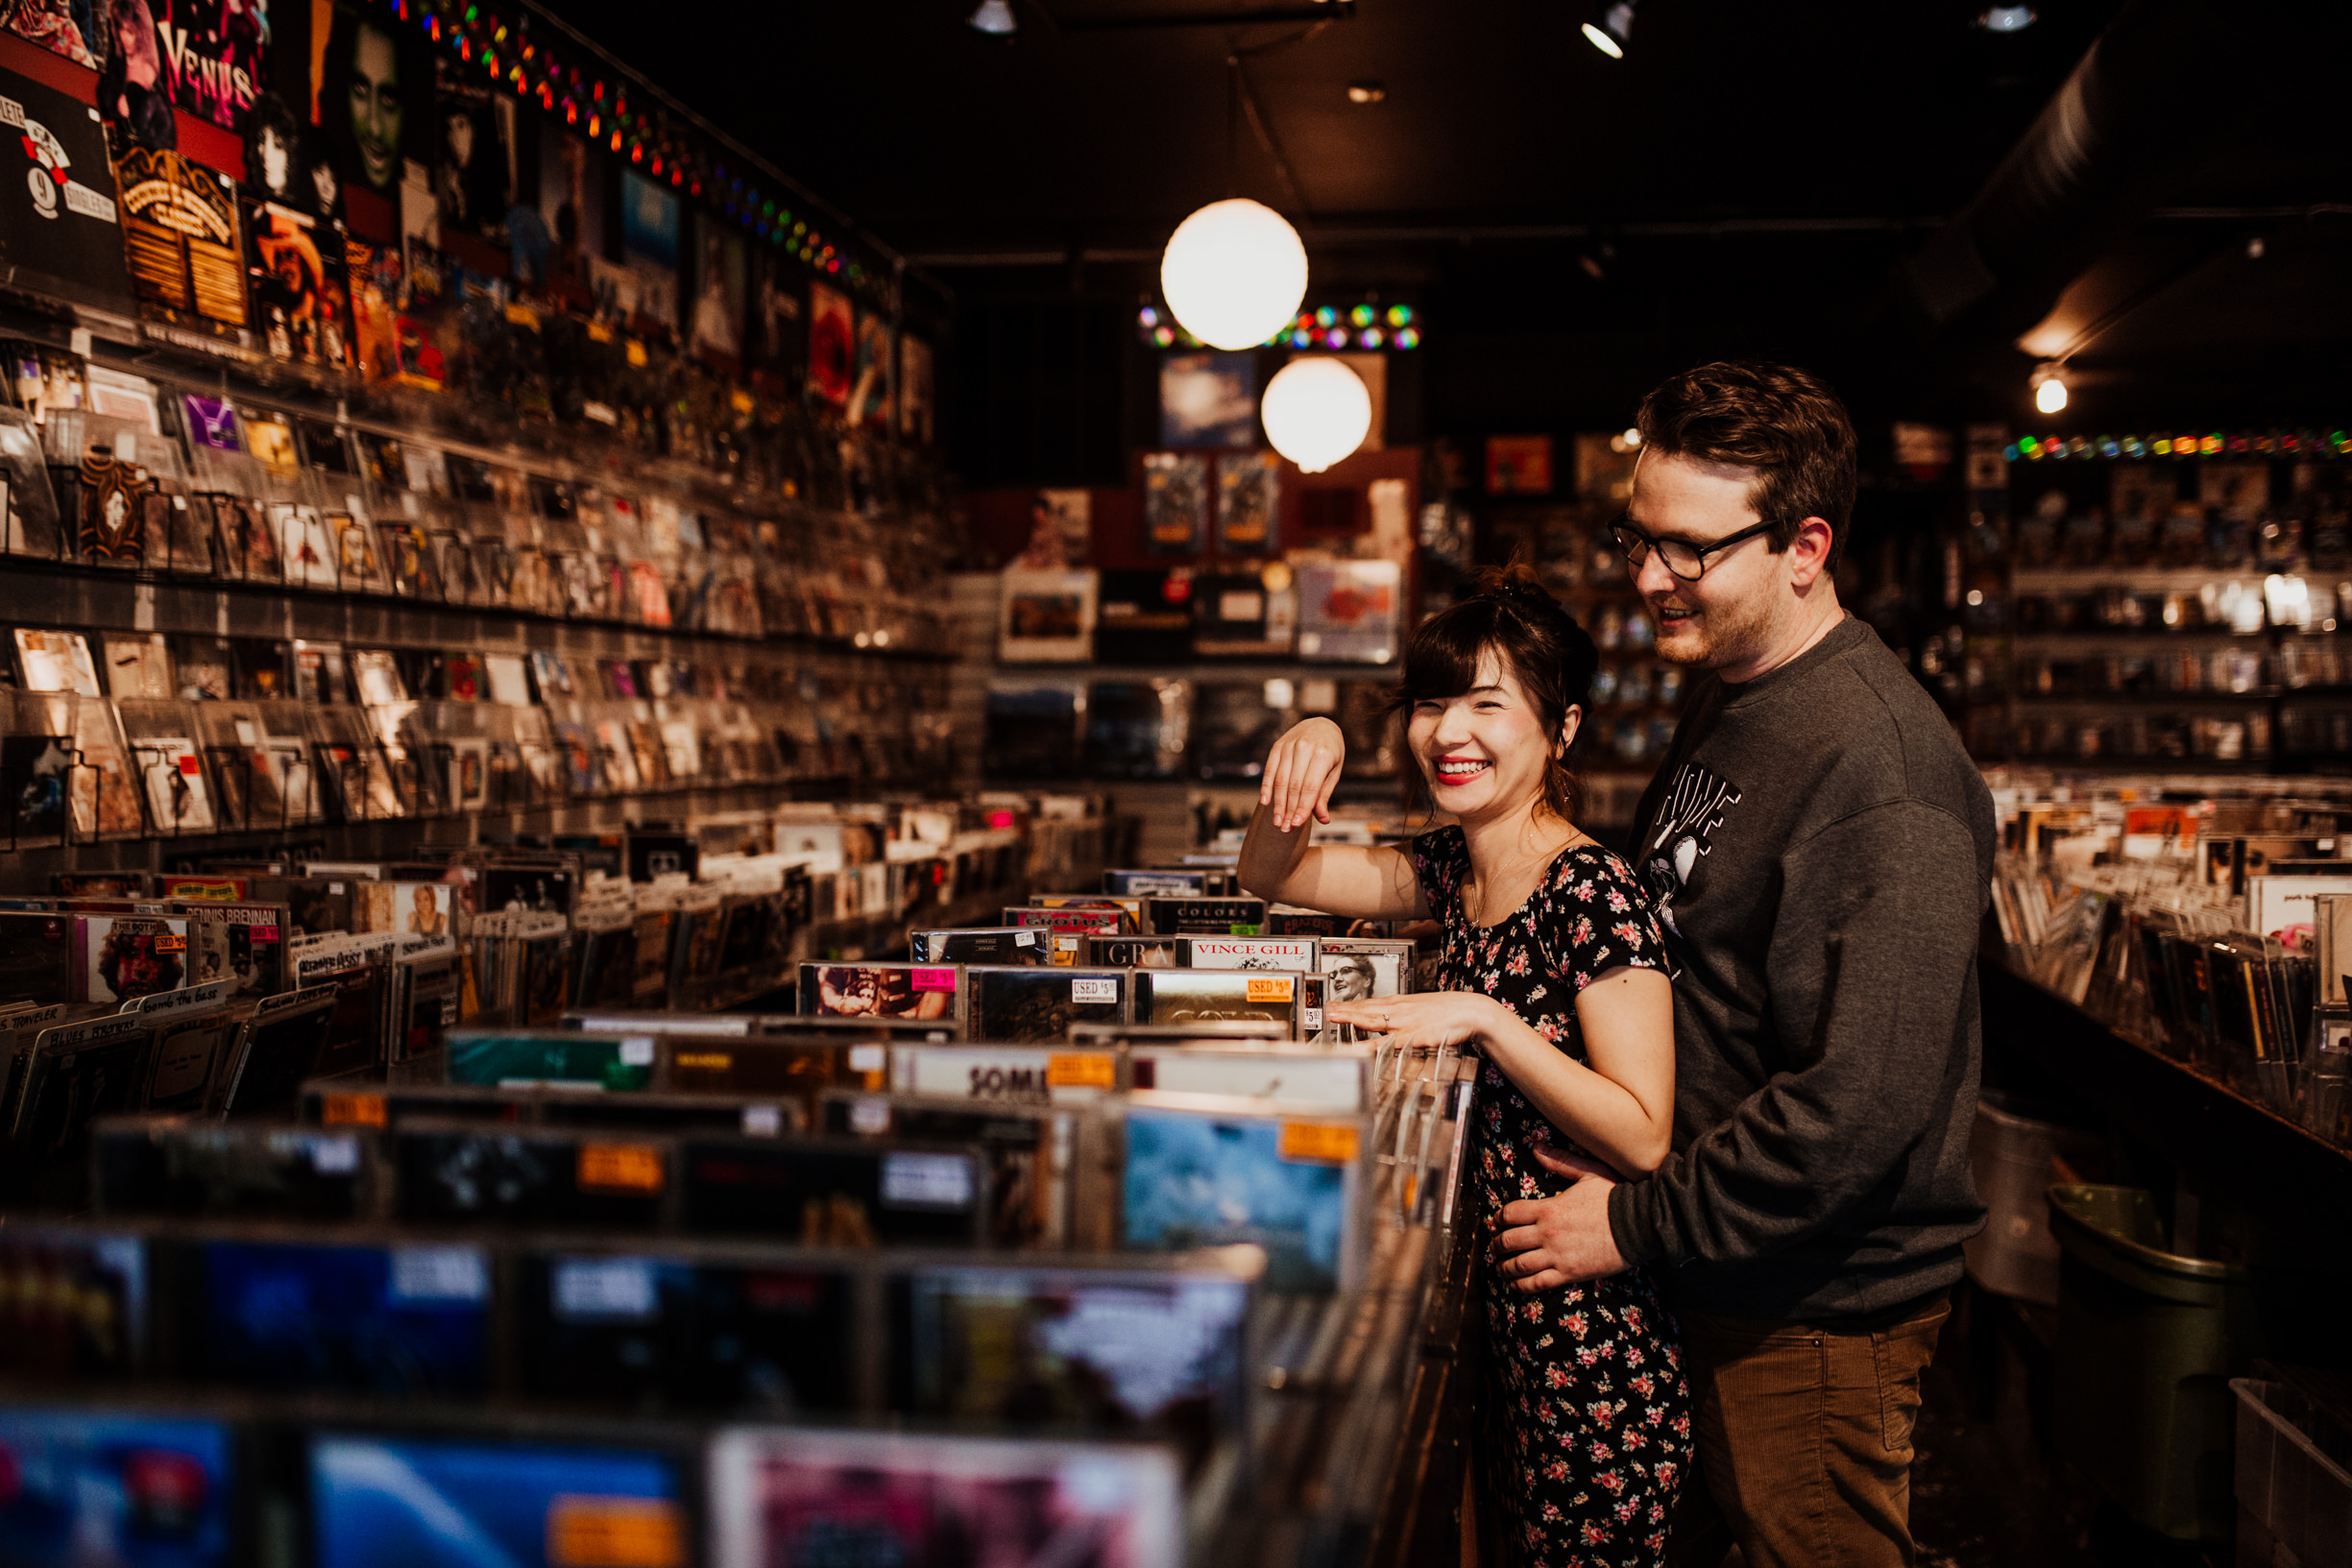 louisville-engagement-photographer-record-store-in-home-session-crystal-ludwick-photo (48 of 53).jpg